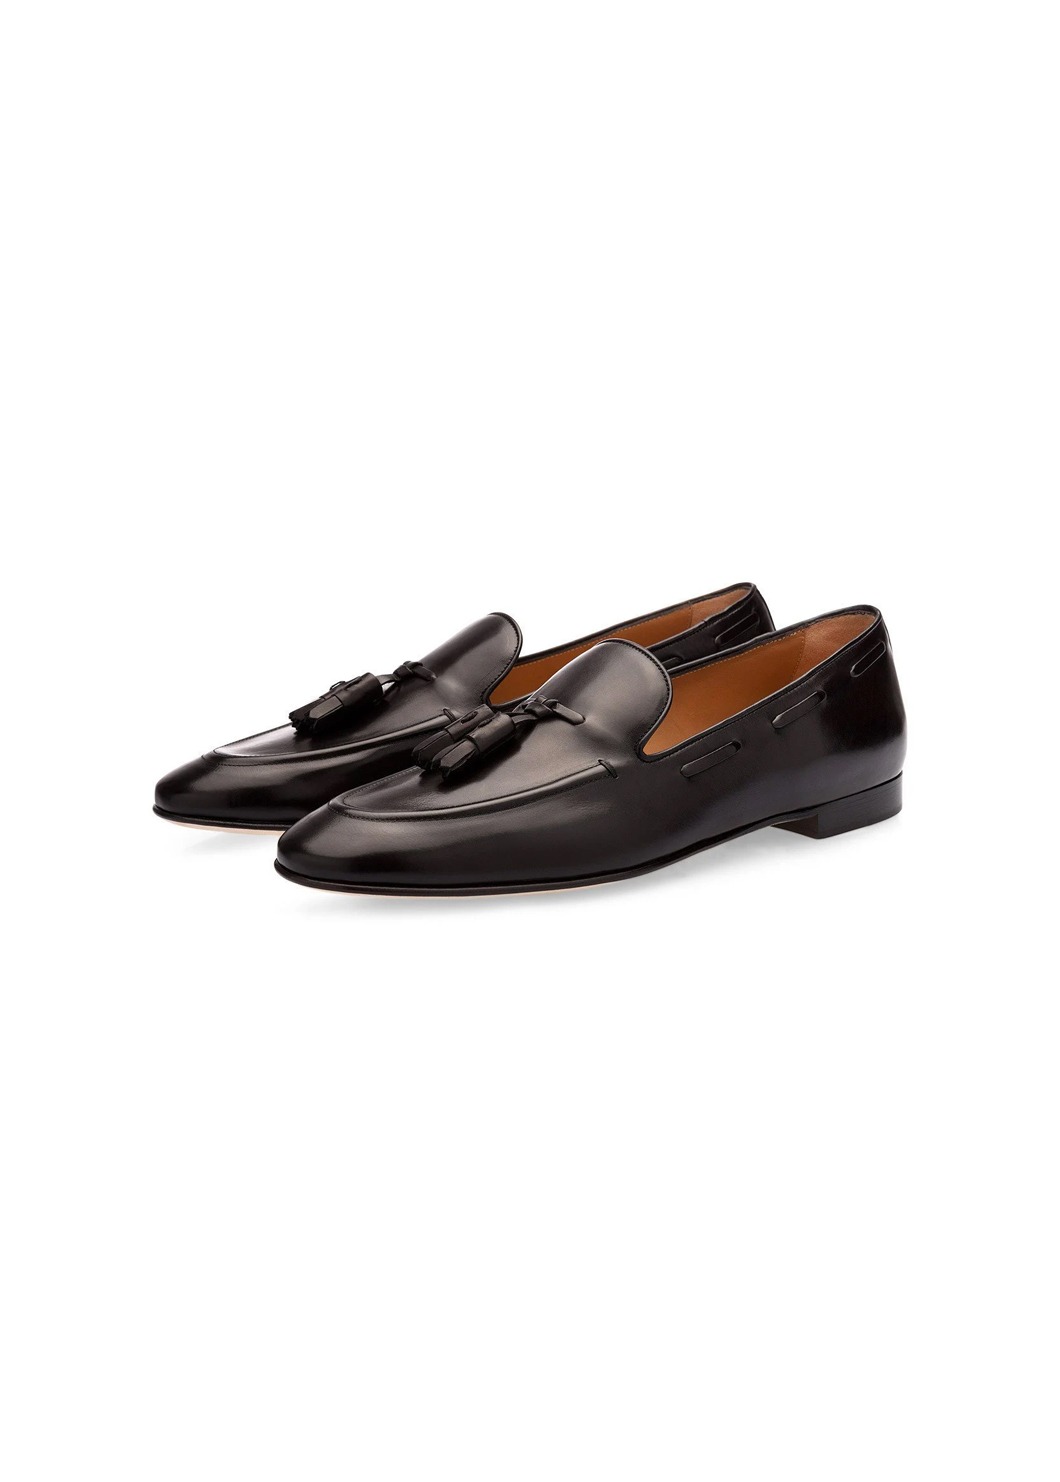 PHILIPPE NAPPA BLACK LOAFERS